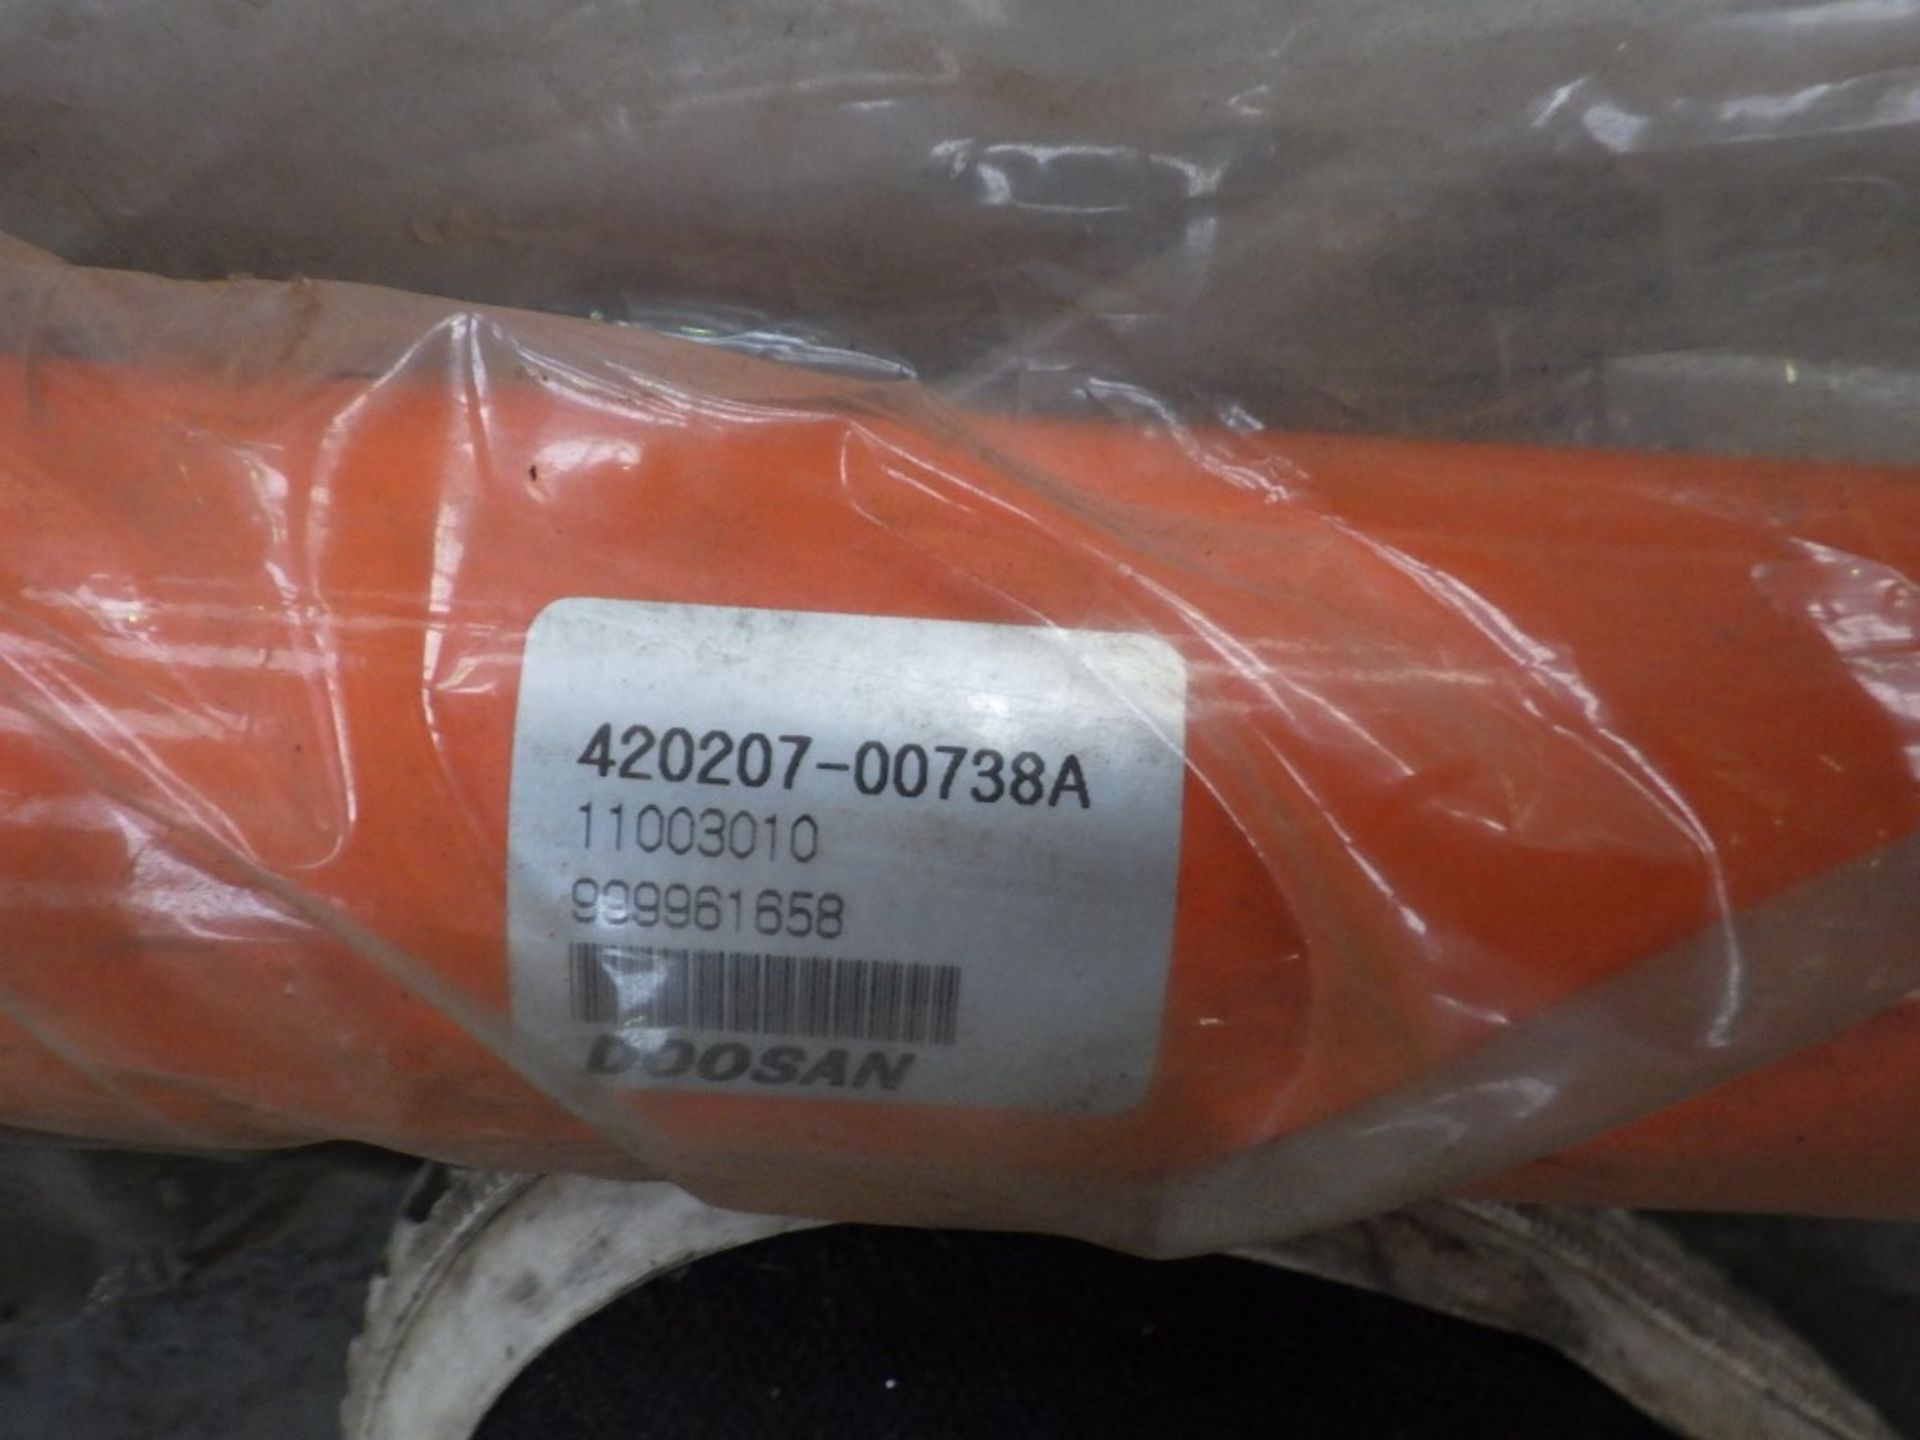 ASSORTED DOOSAN HYDRAULIC PIPES INCL. P/N: K900267, 420210-00649A, K9002282, 20207-00344, 140-01615A - Image 9 of 10